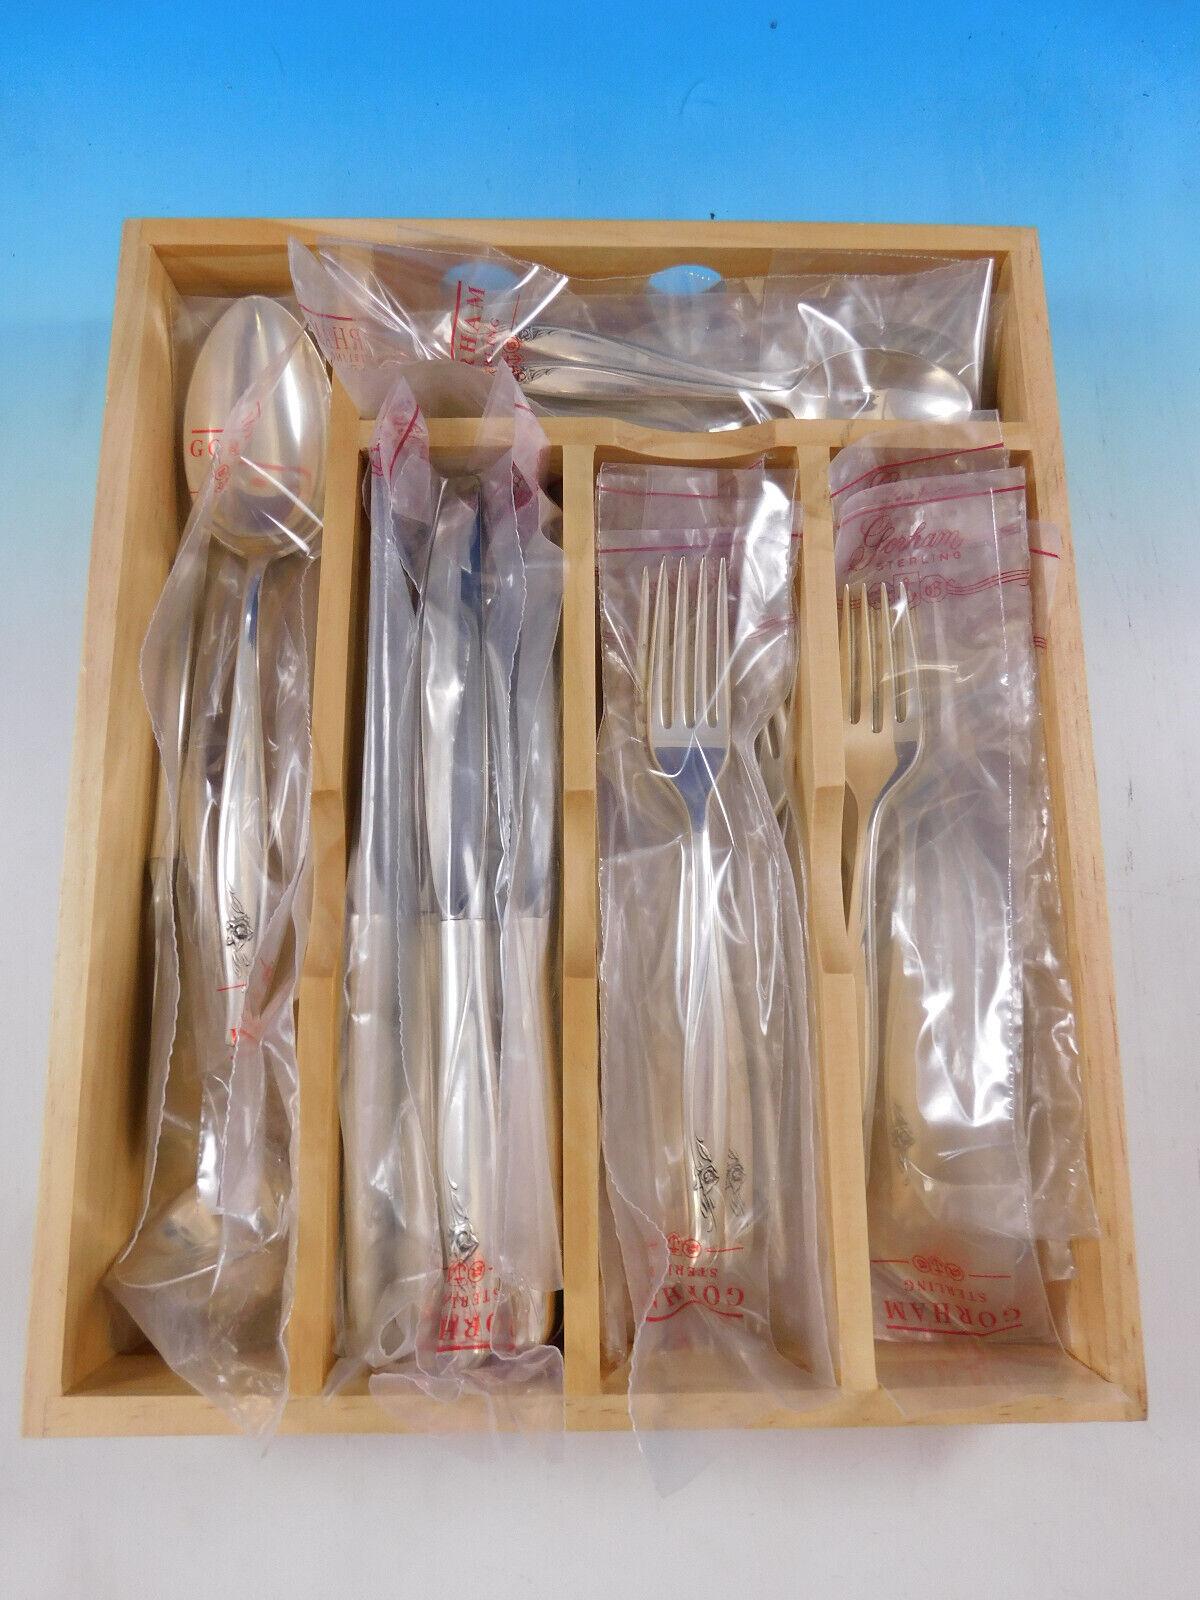 Unused SEA ROSE BY GORHAM sterling silver Flatware set, 27 pieces. This pattern has a flowing modern design and was designed by Richard L. Huggins in the year 1958. Great starter set! This set includes:


6 KNIVES, 9 1/4